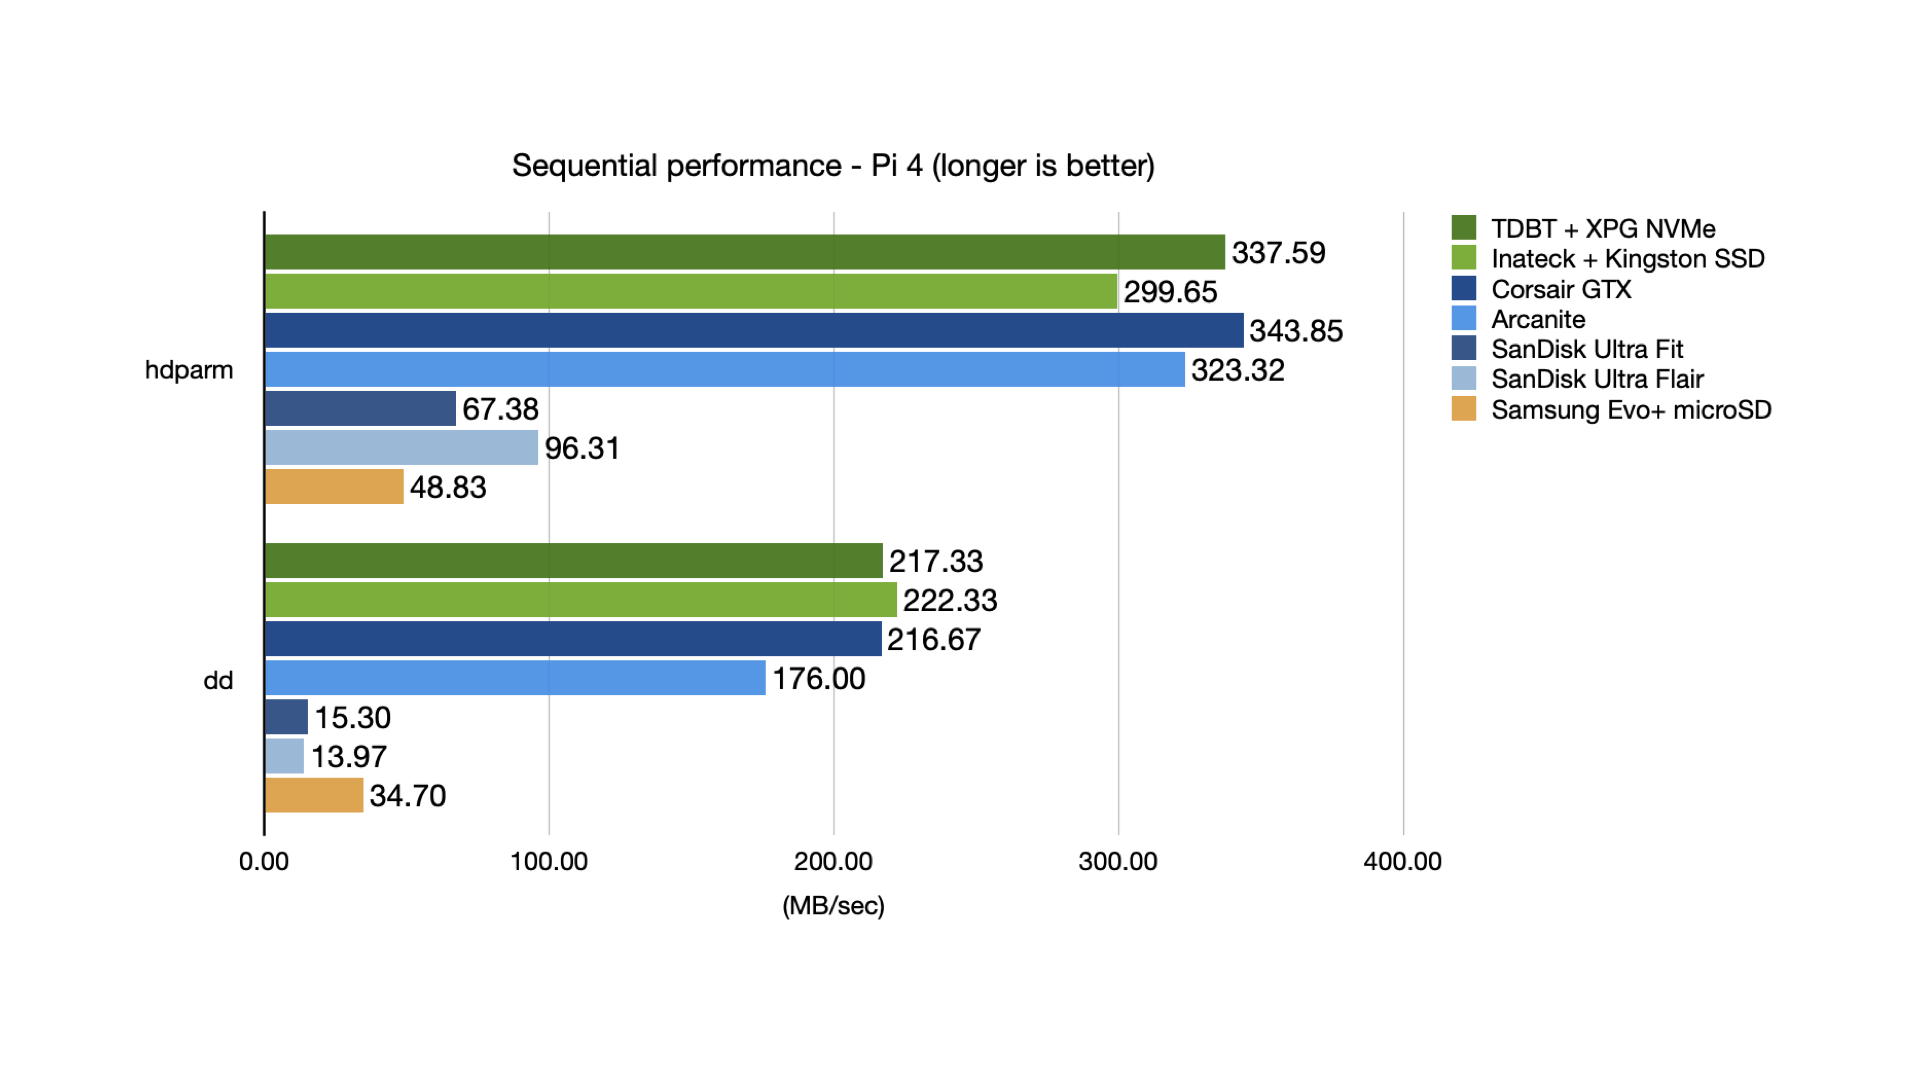 Sequential performance of different USB drives on Raspberry Pi